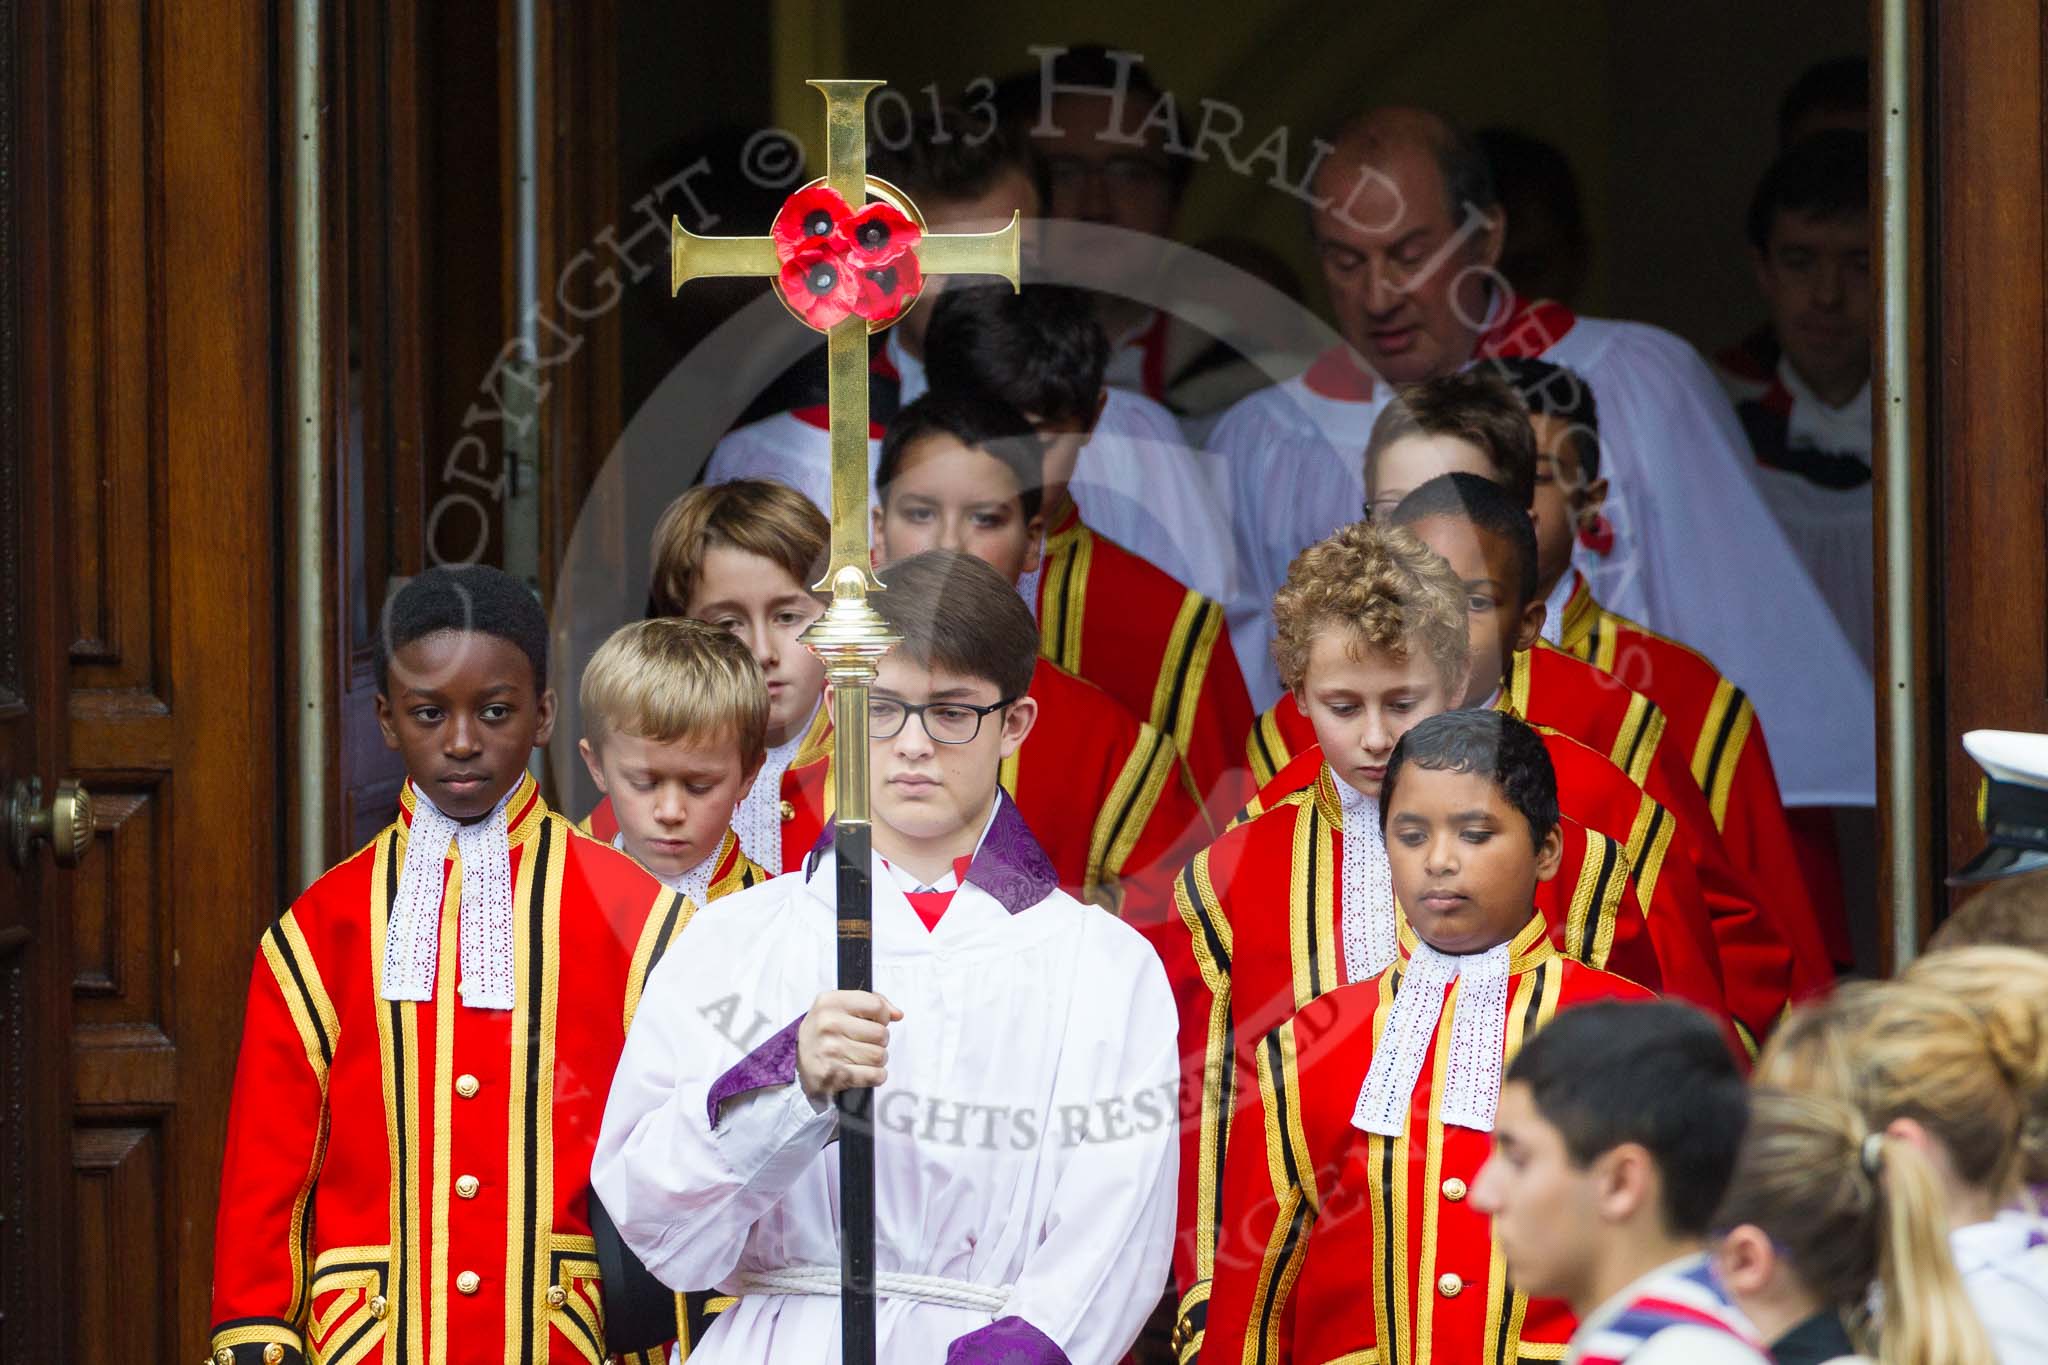 Remembrance Sunday at the Cenotaph 2015: The choir, led by the Cross Bearer, Jason Panagiotopoulos, is emerging from the Foreign- and Commonwealth Office Building. Behind them the 6 Gentlemen-in-Ordinary. Image #74, 08 November 2015 10:53 Whitehall, London, UK